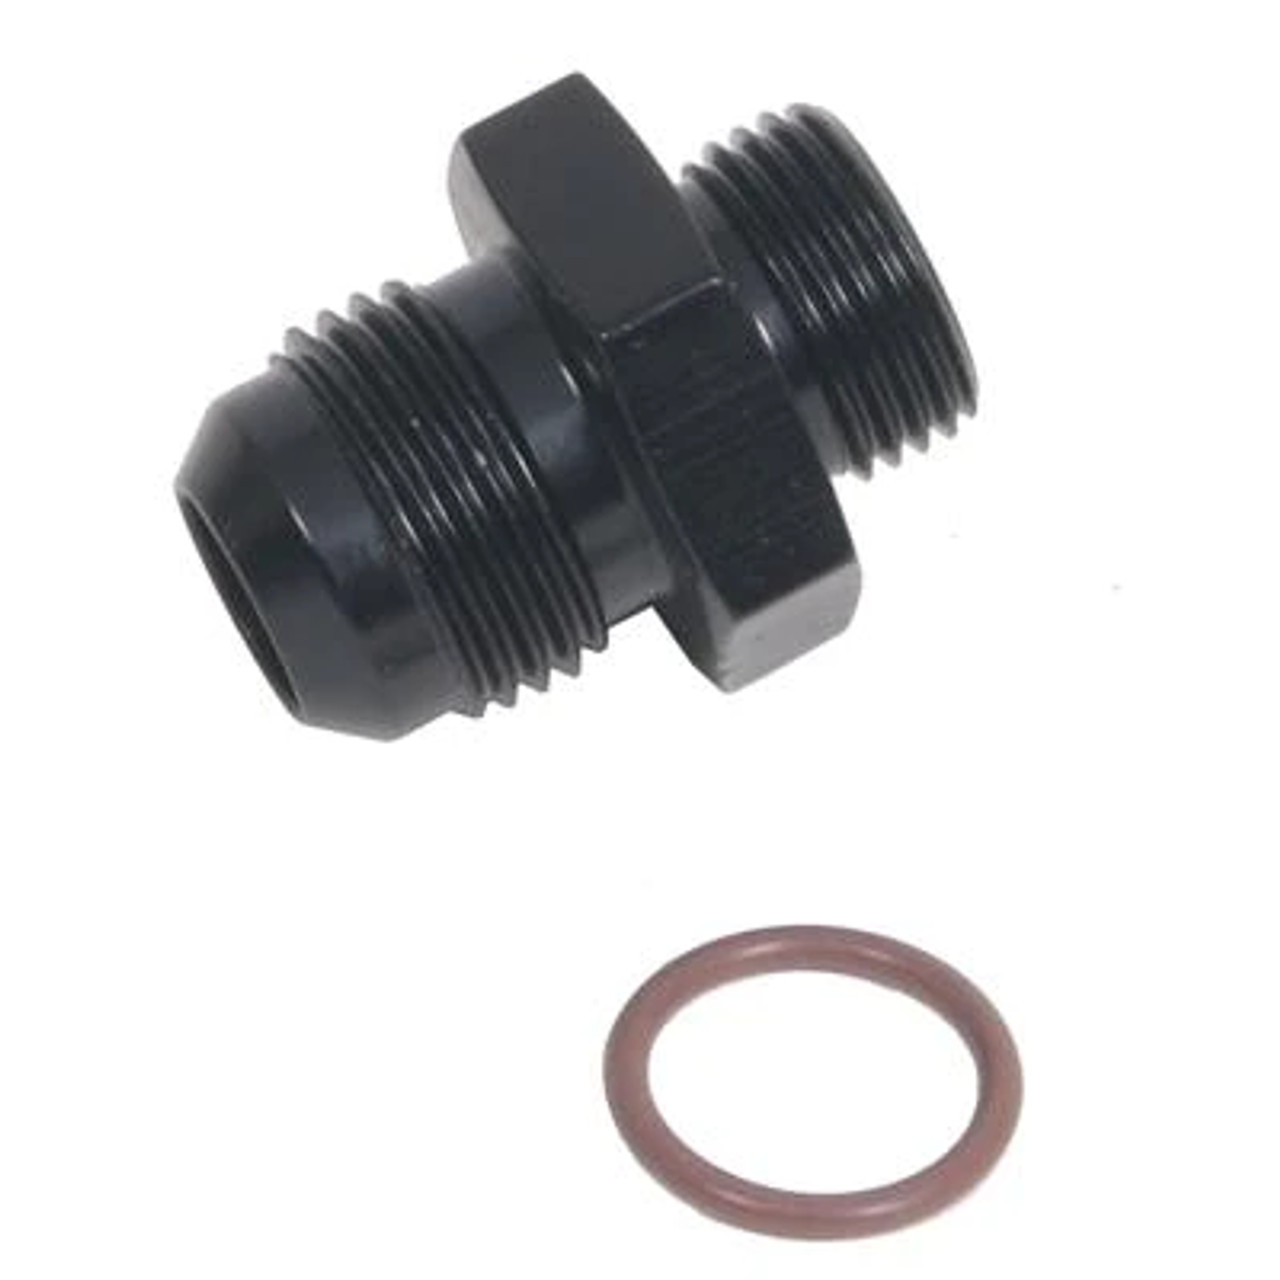 Fragola -6 AN x -10 ORB (7/8-14 O-Ring) Adapter 495113-BL